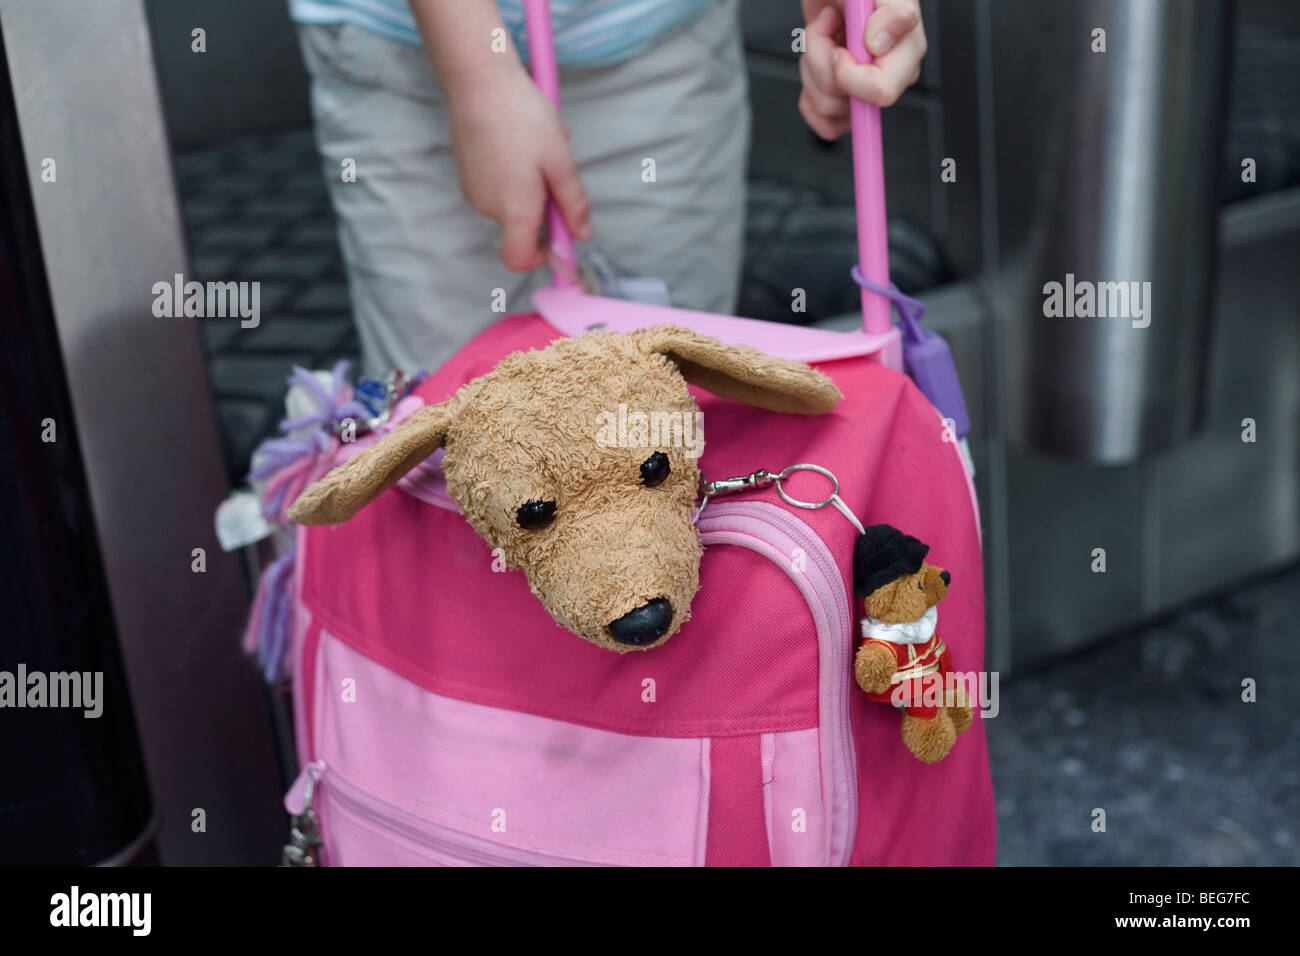 Childrens' toy dog and pink baggage in check-in areas at Heathrow Airport's Terminal 5. Stock Photo